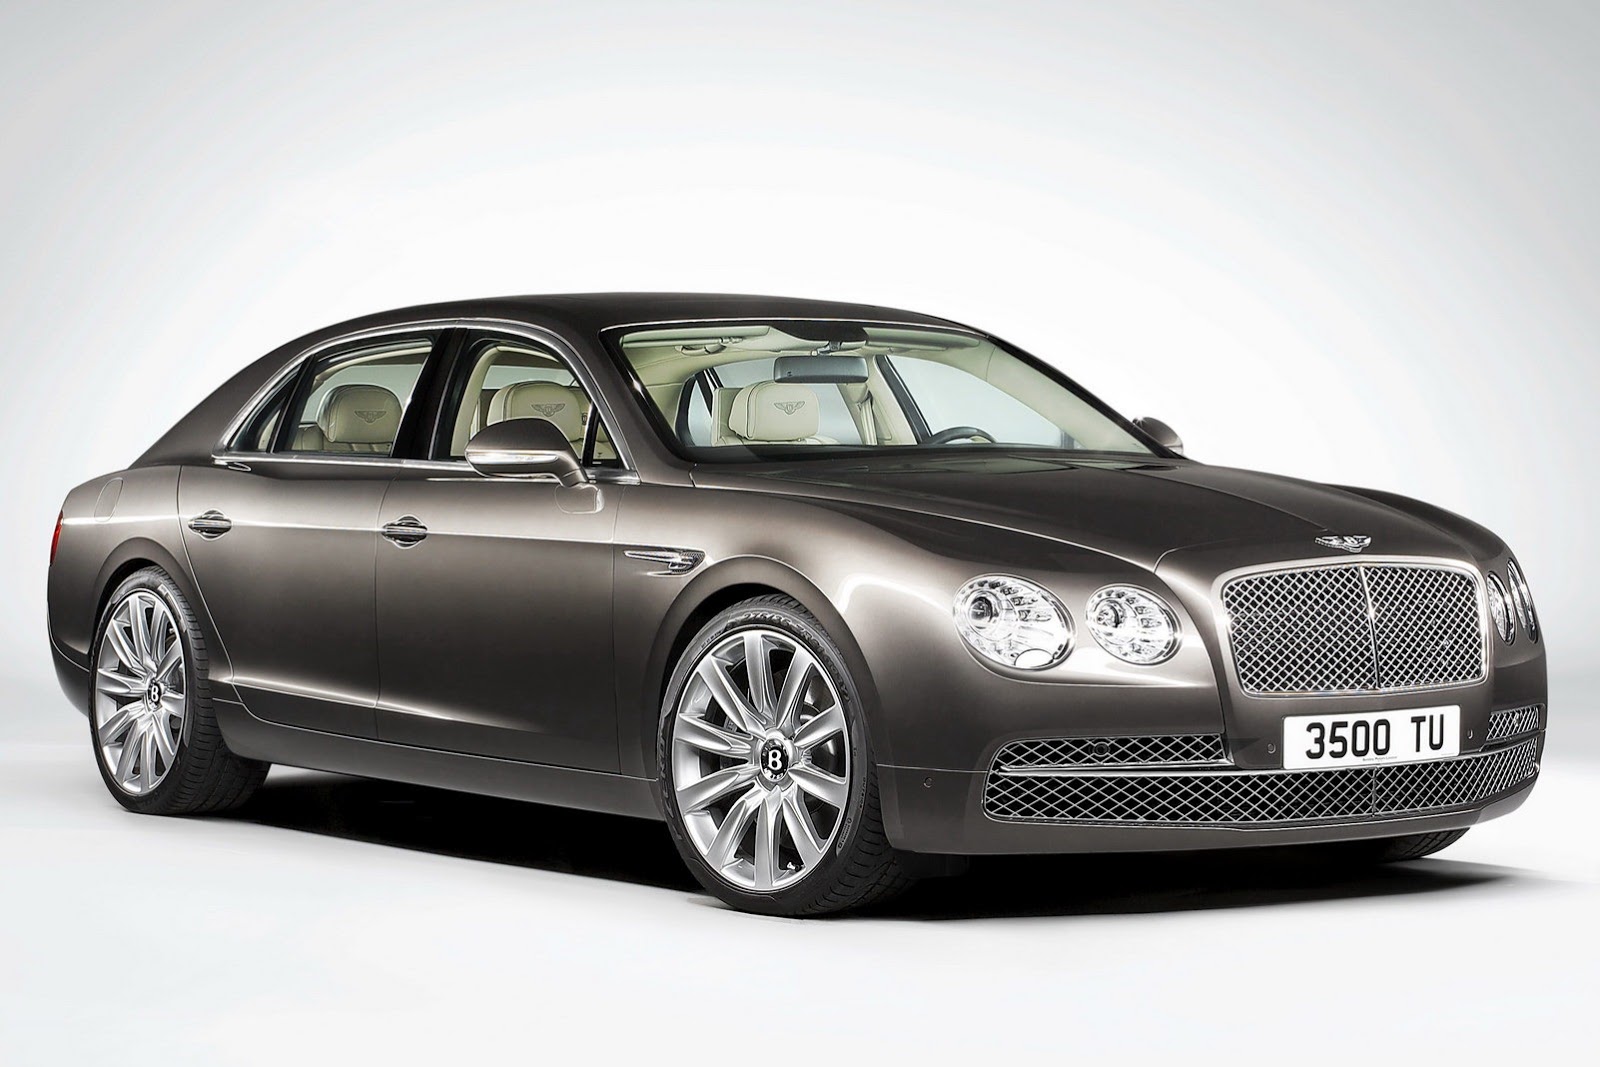 2014 Bentley Flying Spur front three quarters